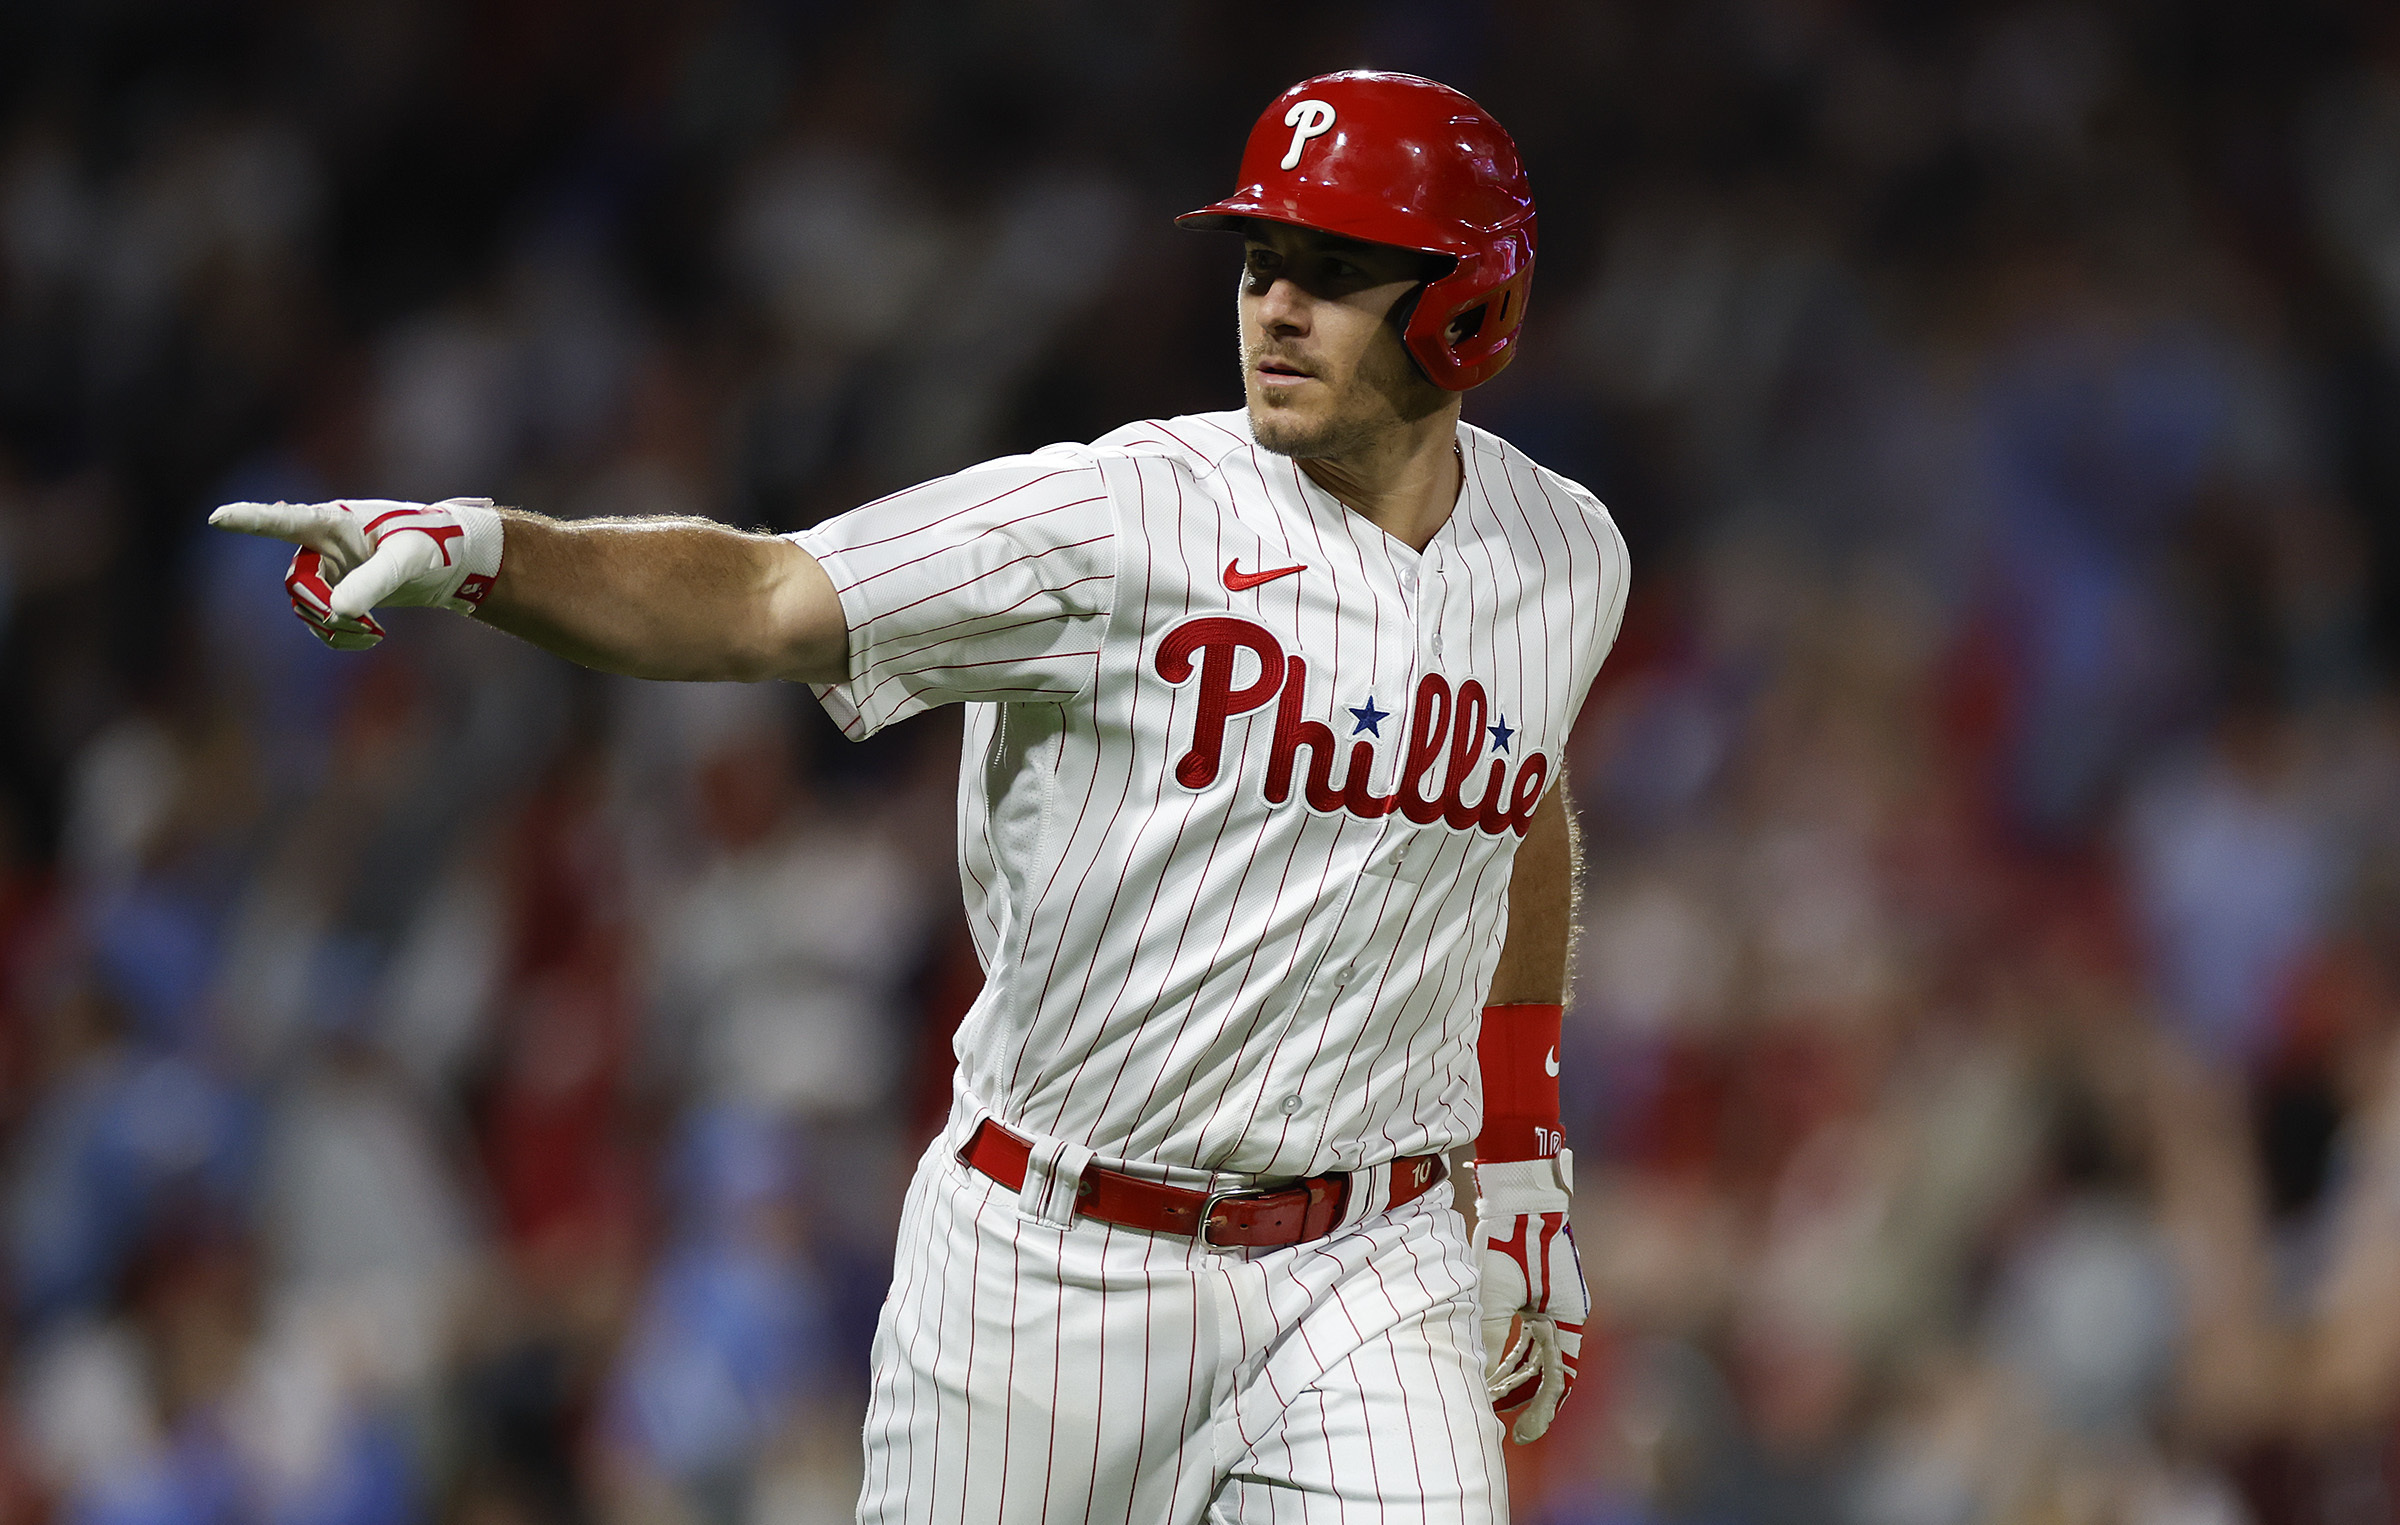 Phillies: Watch rookie Orion Kerkering's excellent MLB debut, and